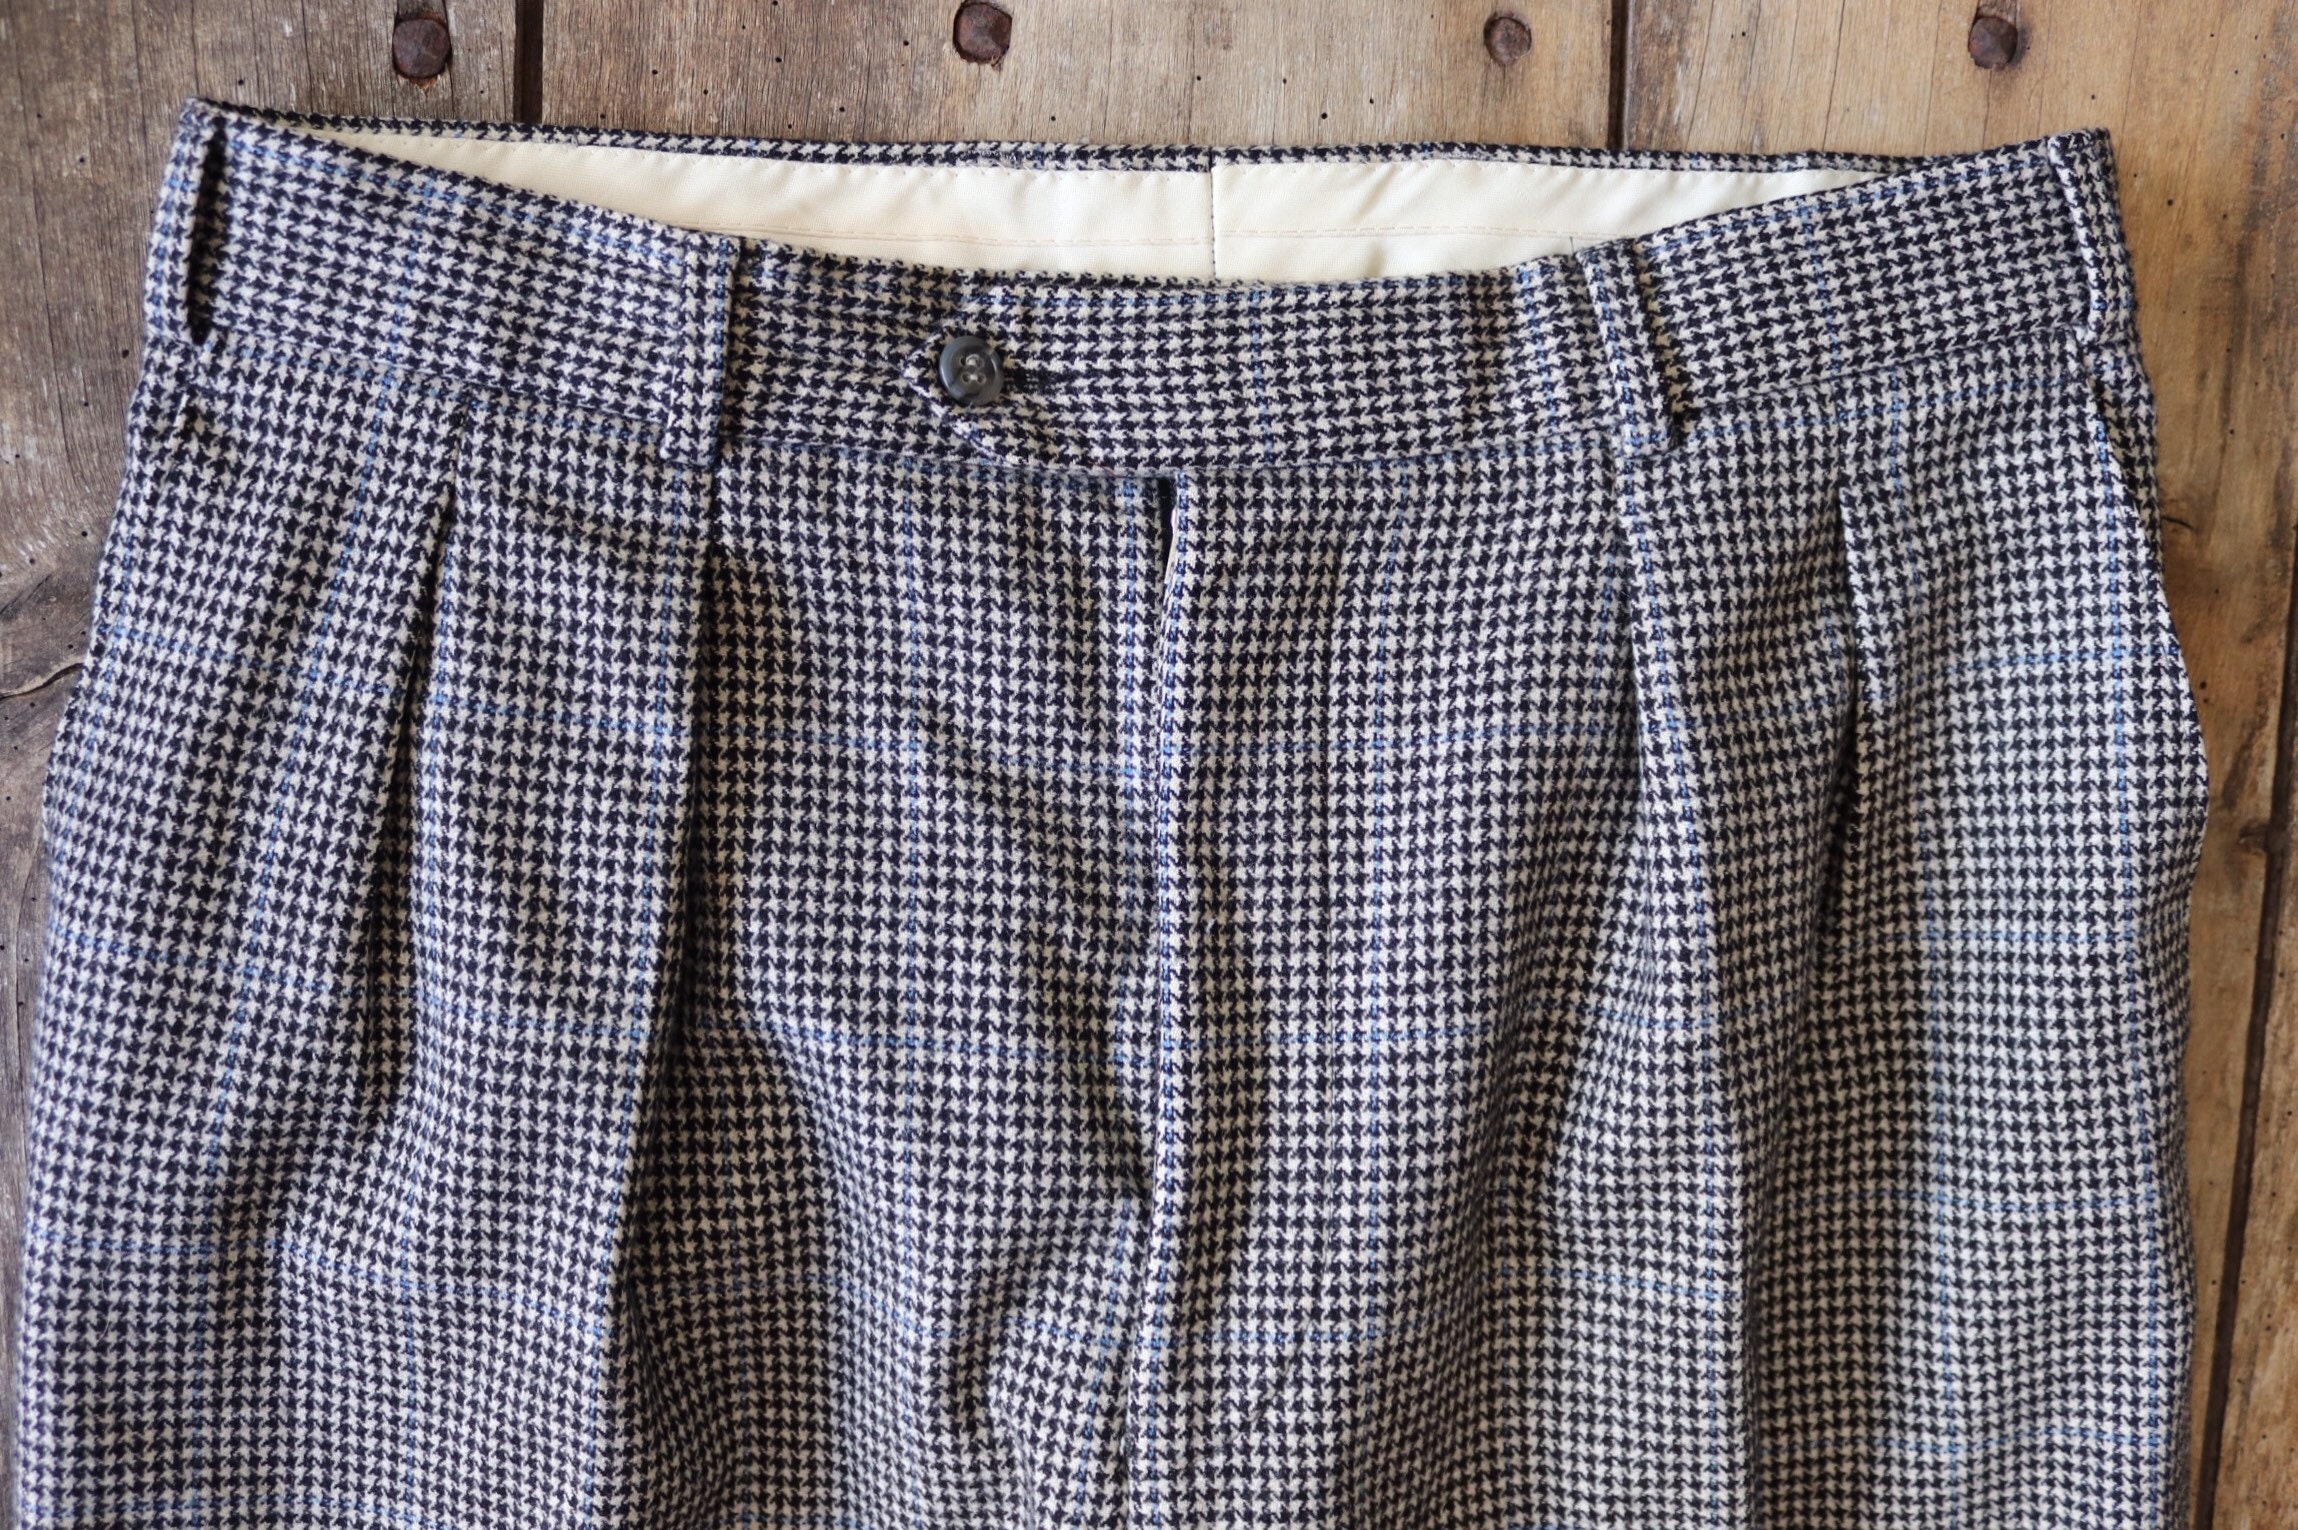 Vintage 1980s 80s does 1950s 50s houndstooth dogtooth check cuffed trousers  pants pleated drop loop 34” x 32” carrot